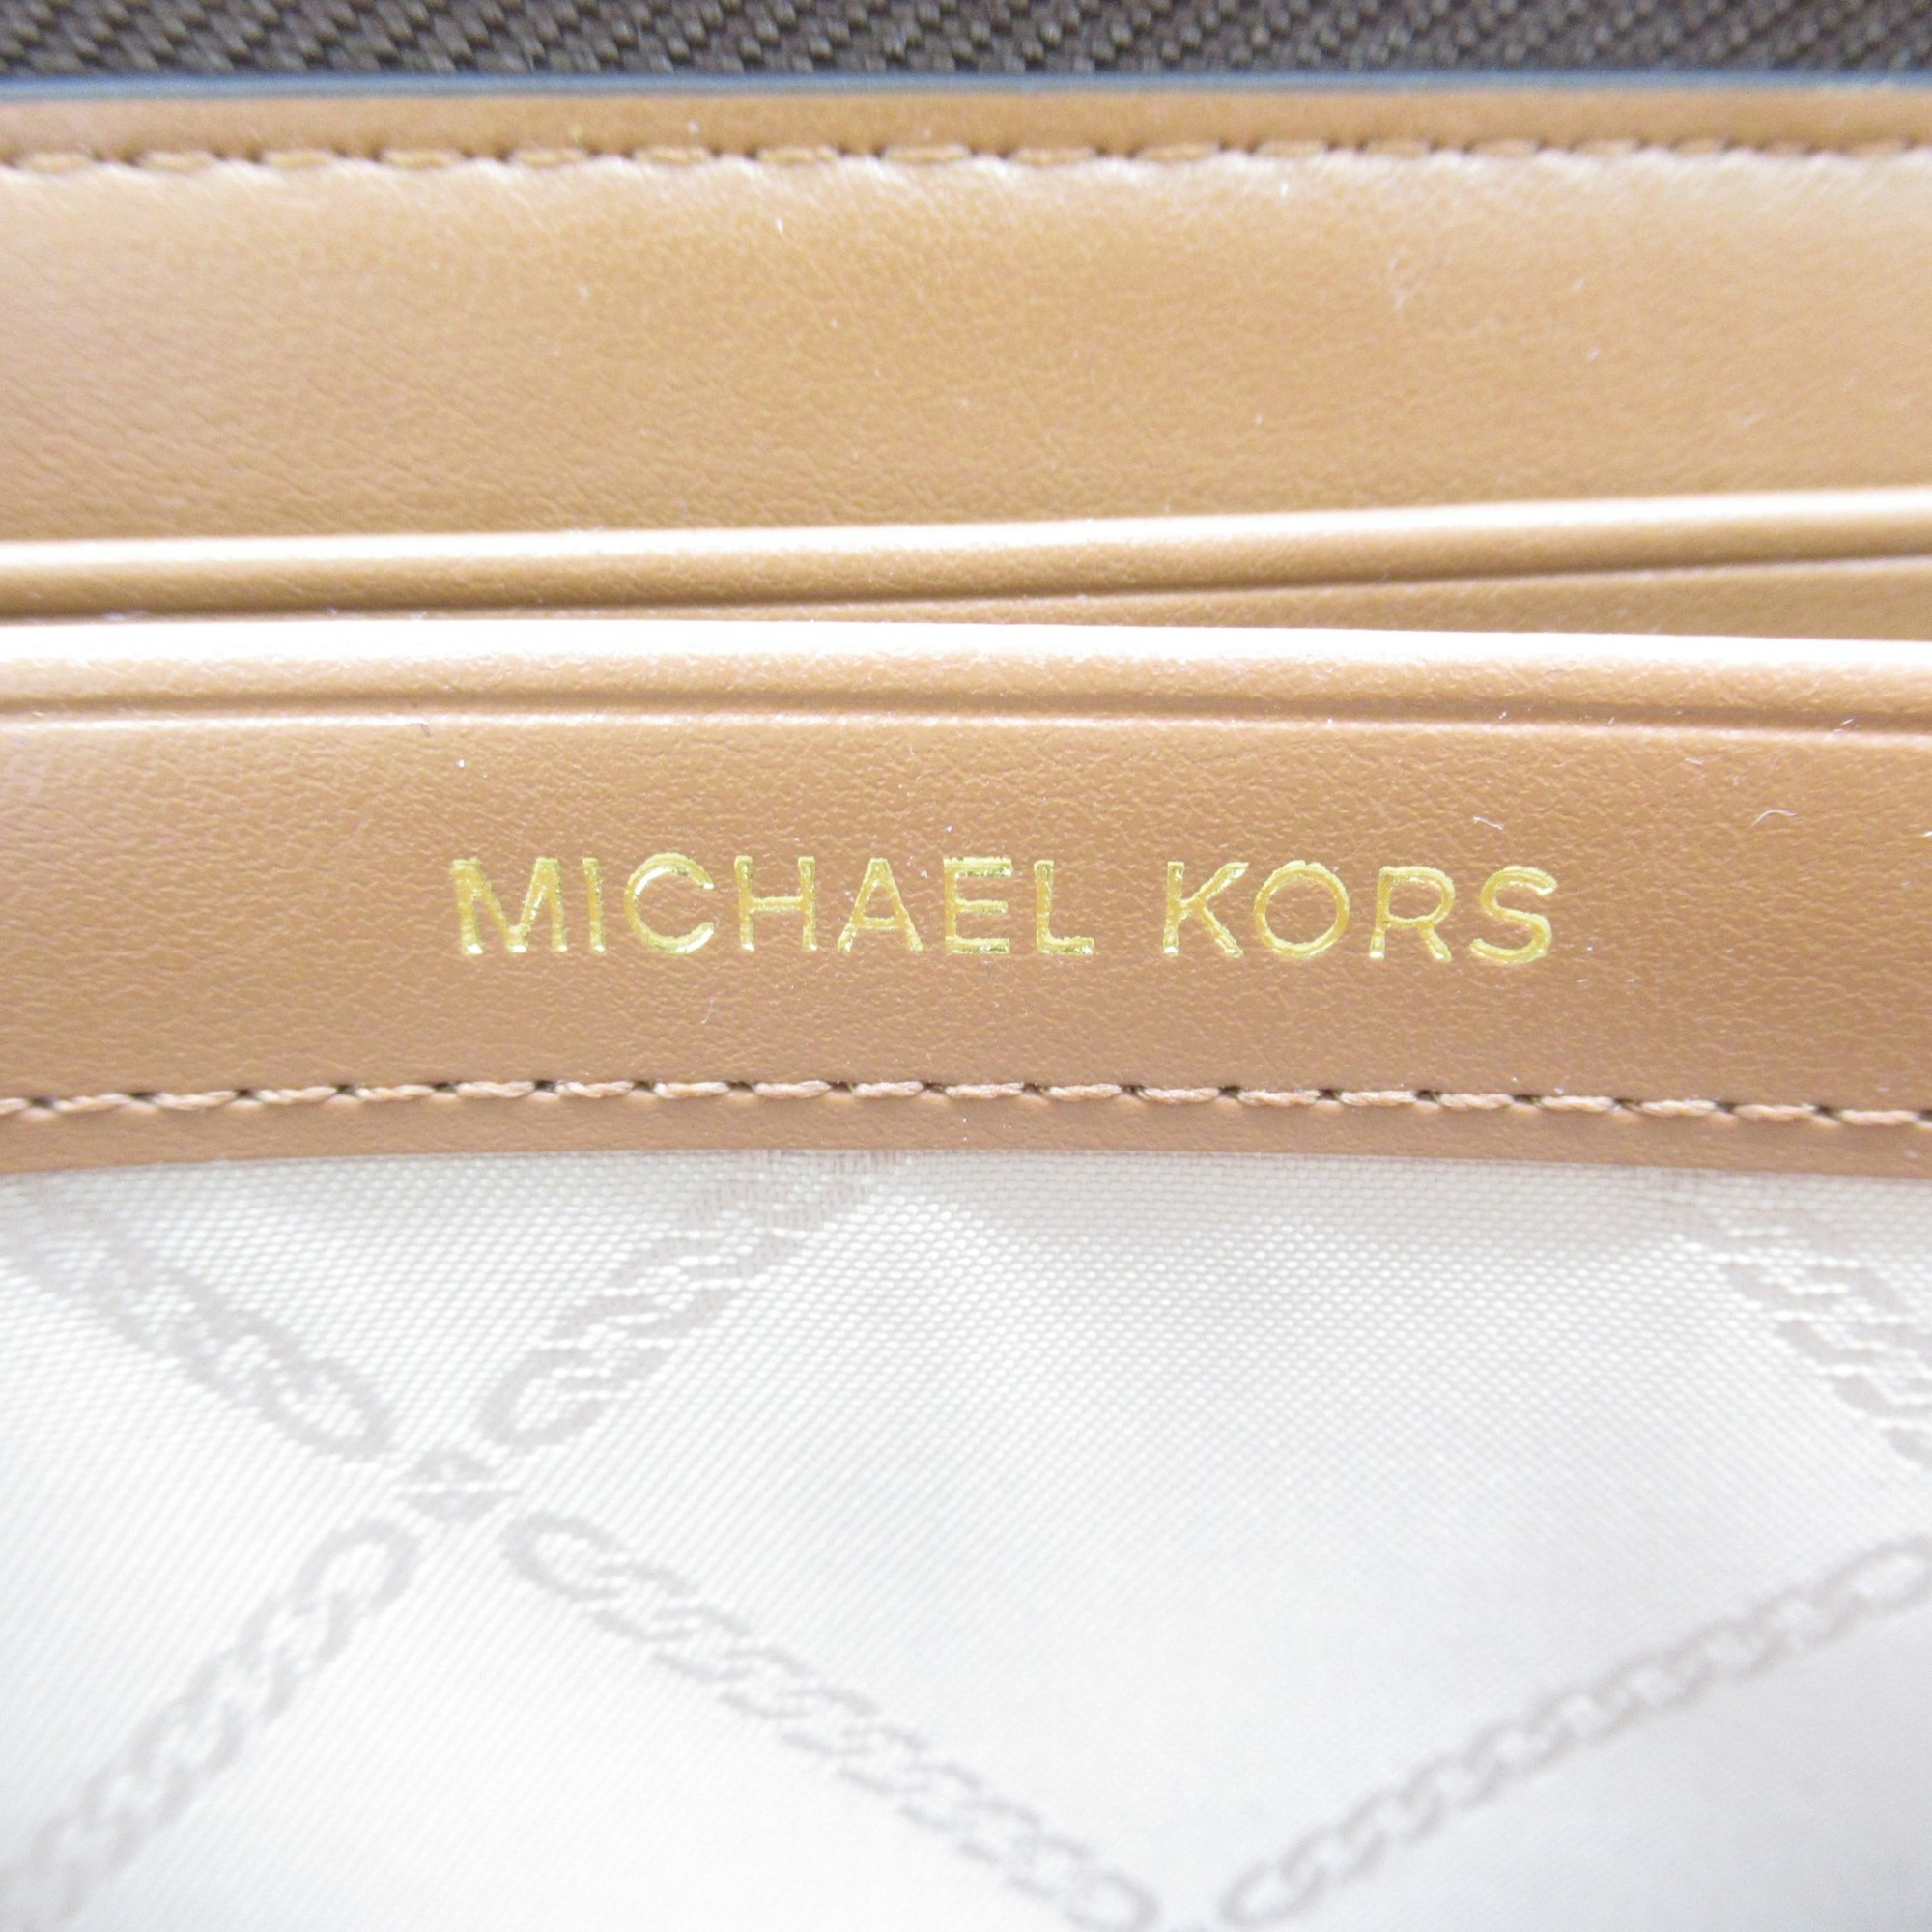 Michael Kors Round long wallet Brown PVC coated canvas leather 34F9GM9E9B200